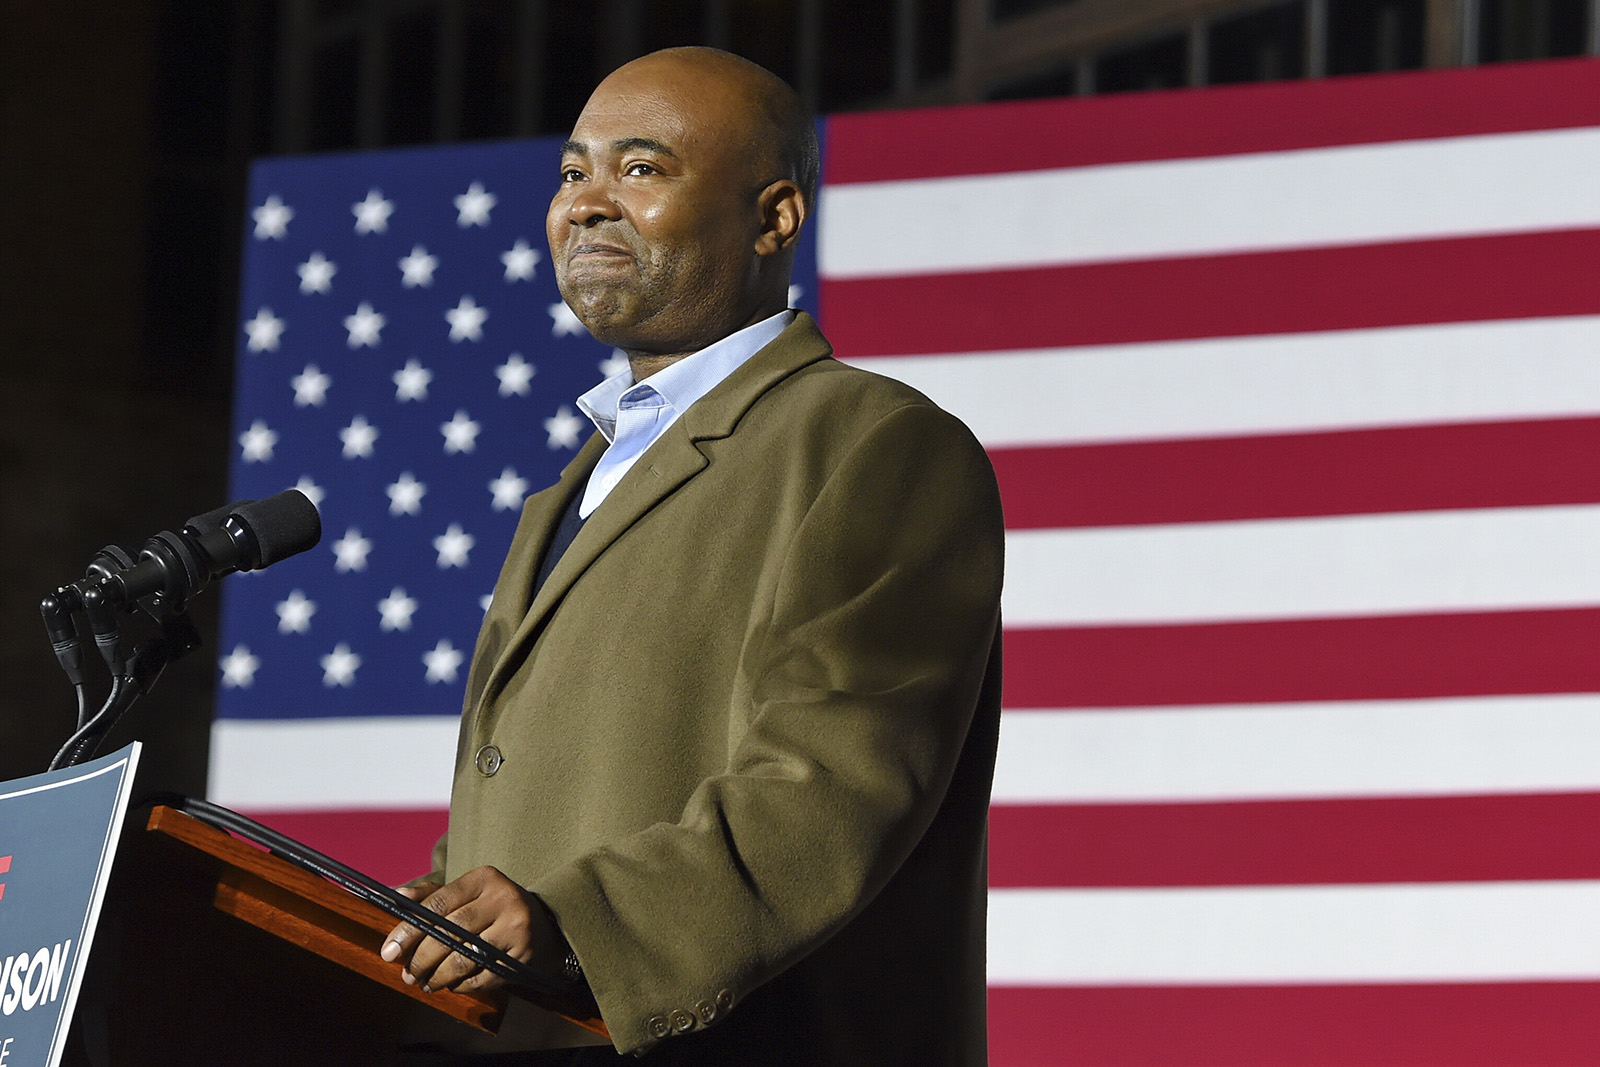 In this Nov. 3, 2020, file photo, Democratic Senate candidate Jaime Harrison speaks at a watch party in Columbia, South Carolina, after losing the Senate race. (AP Photo/Richard Shiro, File)